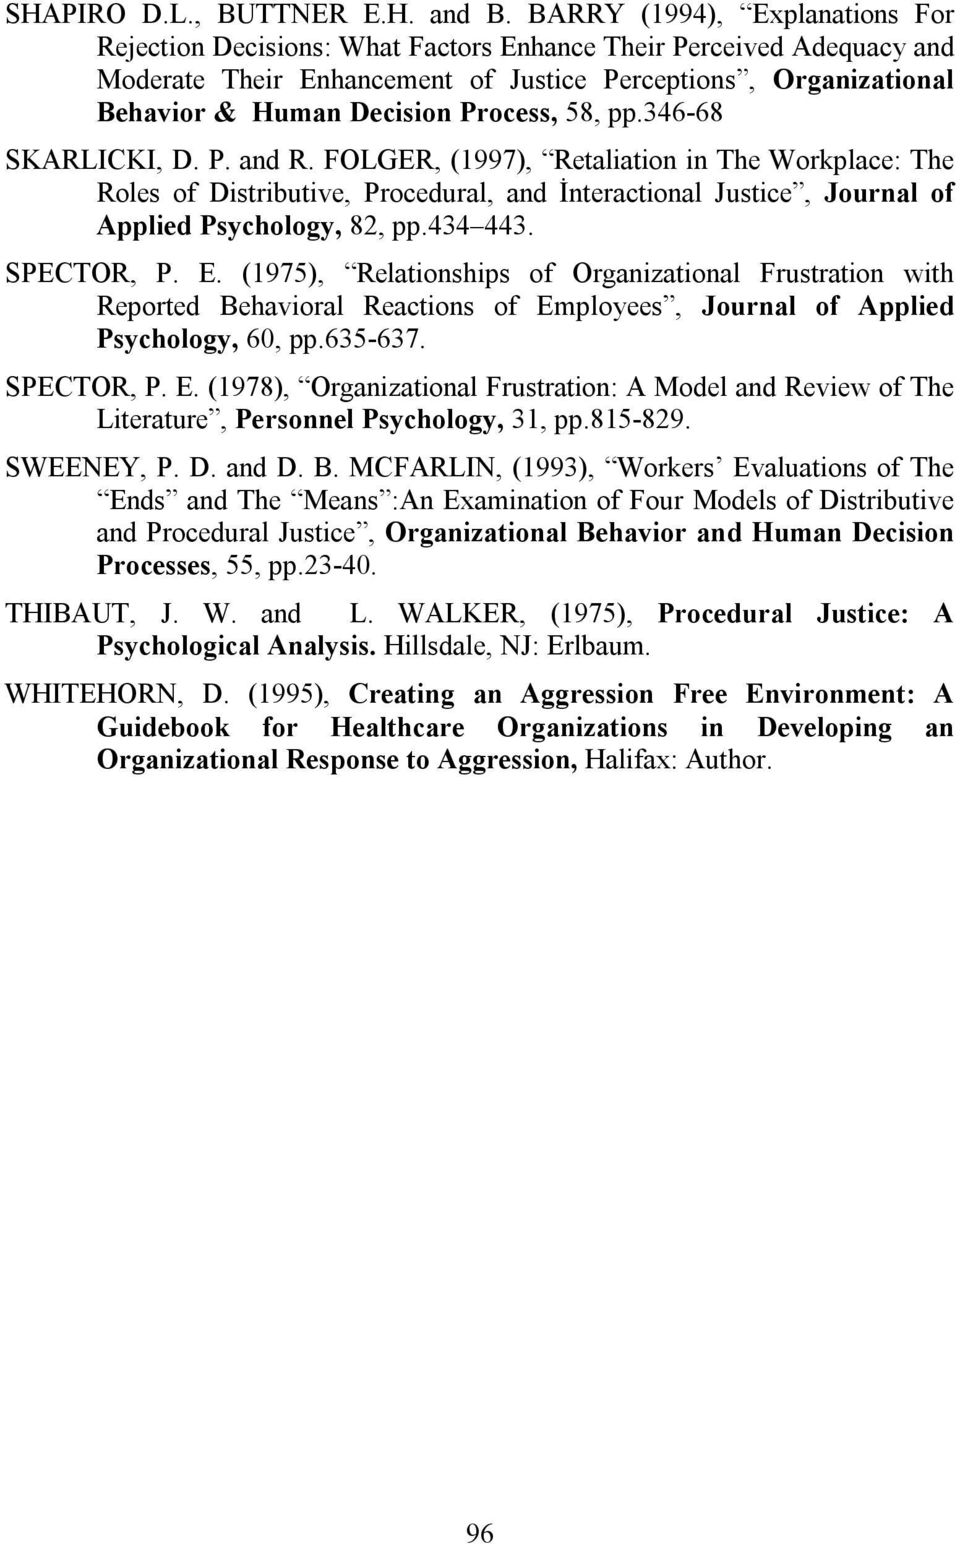 Process, 58, pp.346-68 SKARLICKI, D. P. and R. FOLGER, (1997), Retaliation in The Workplace: The Roles of Distributive, Procedural, and İnteractional Justice, Journal of Applied Psychology, 82, pp.